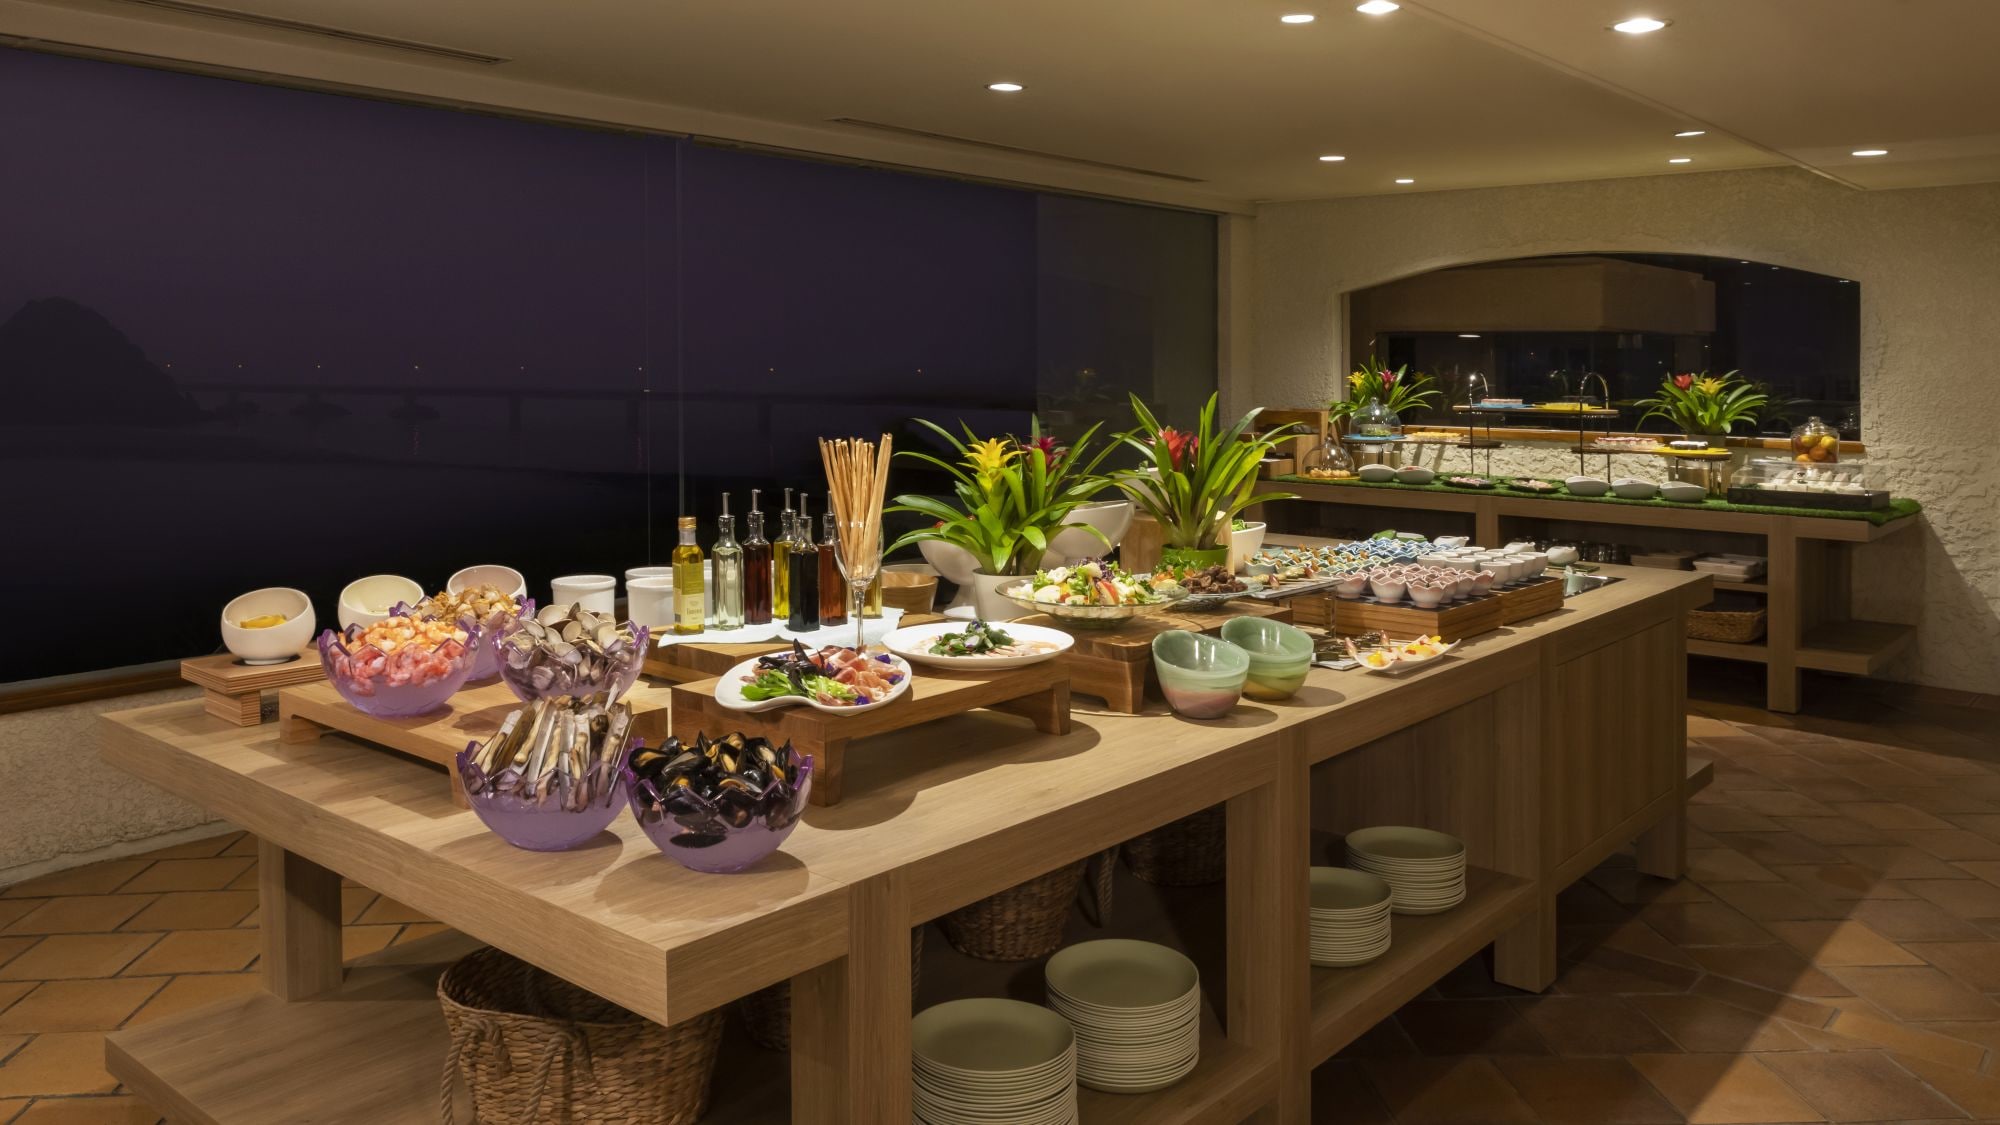 [Dinner Buffet] Approximately 70 kinds of dishes that incorporate fresh ingredients from the sea and mountains of Yamaguchi Prefecture are lined up.